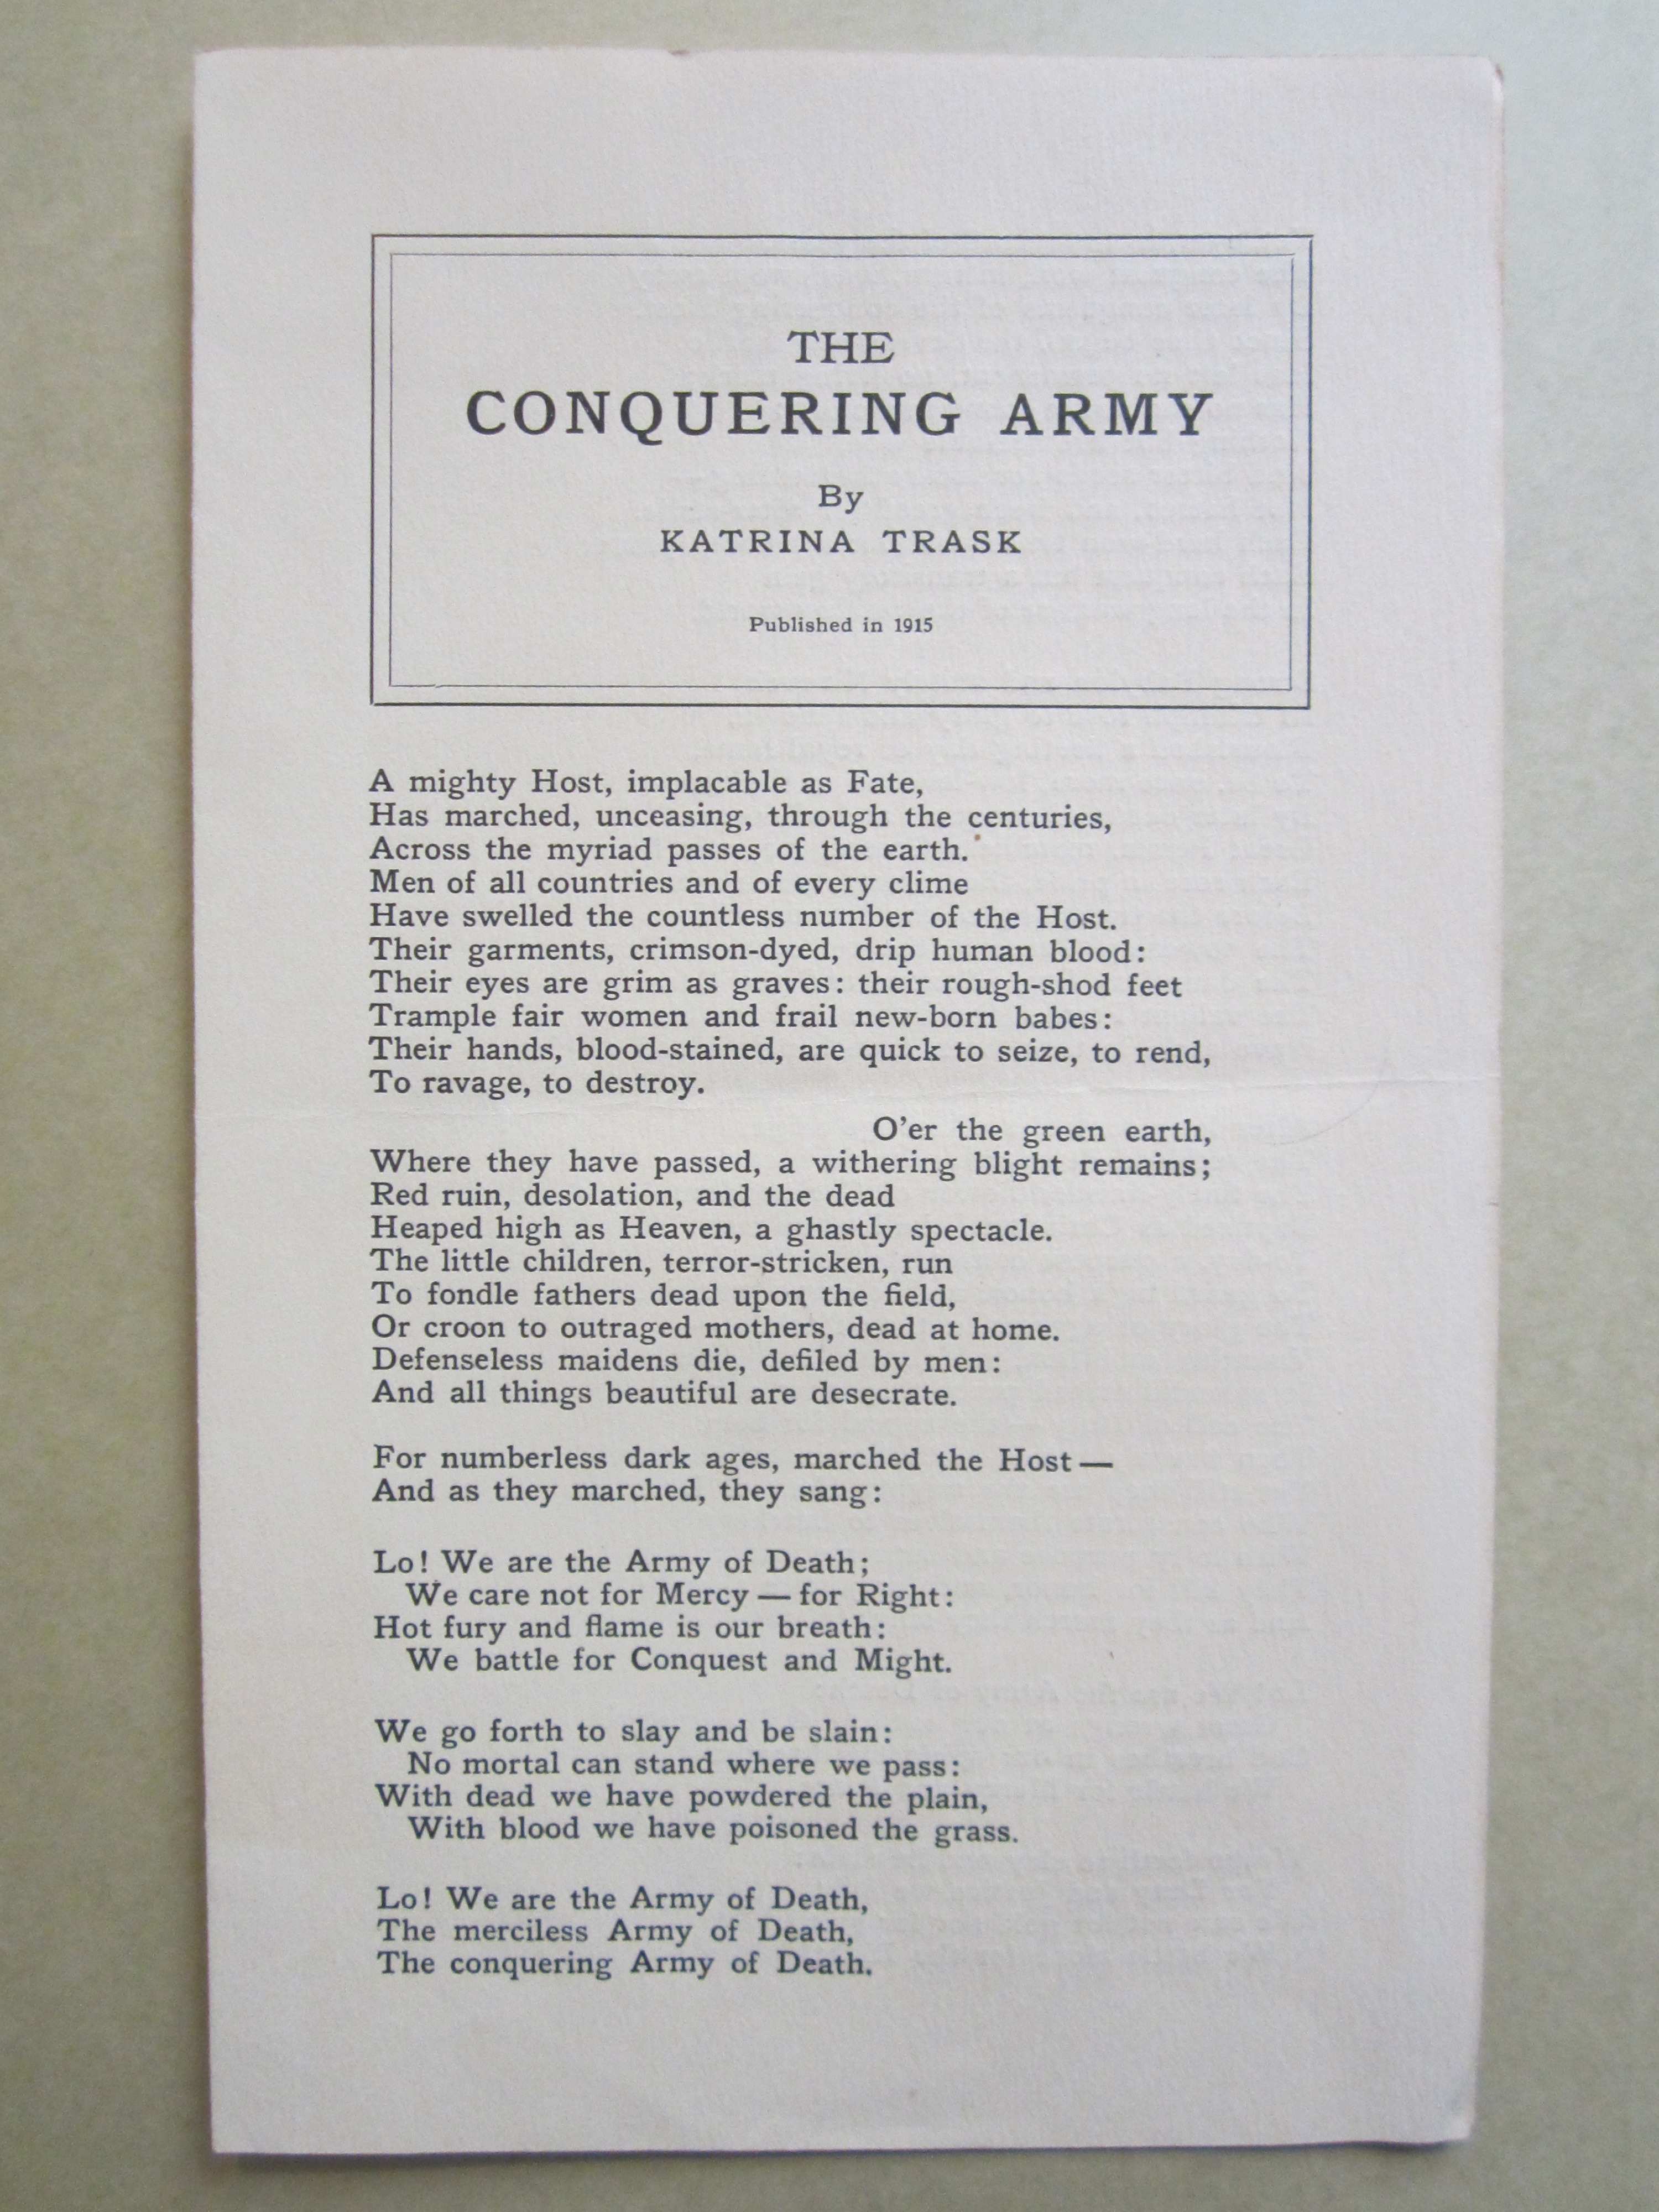 Trask’s pacifism is represented by a broadside “The Conquering Army” (1915) distributed through the Clearing House for Limitation of Armament. 